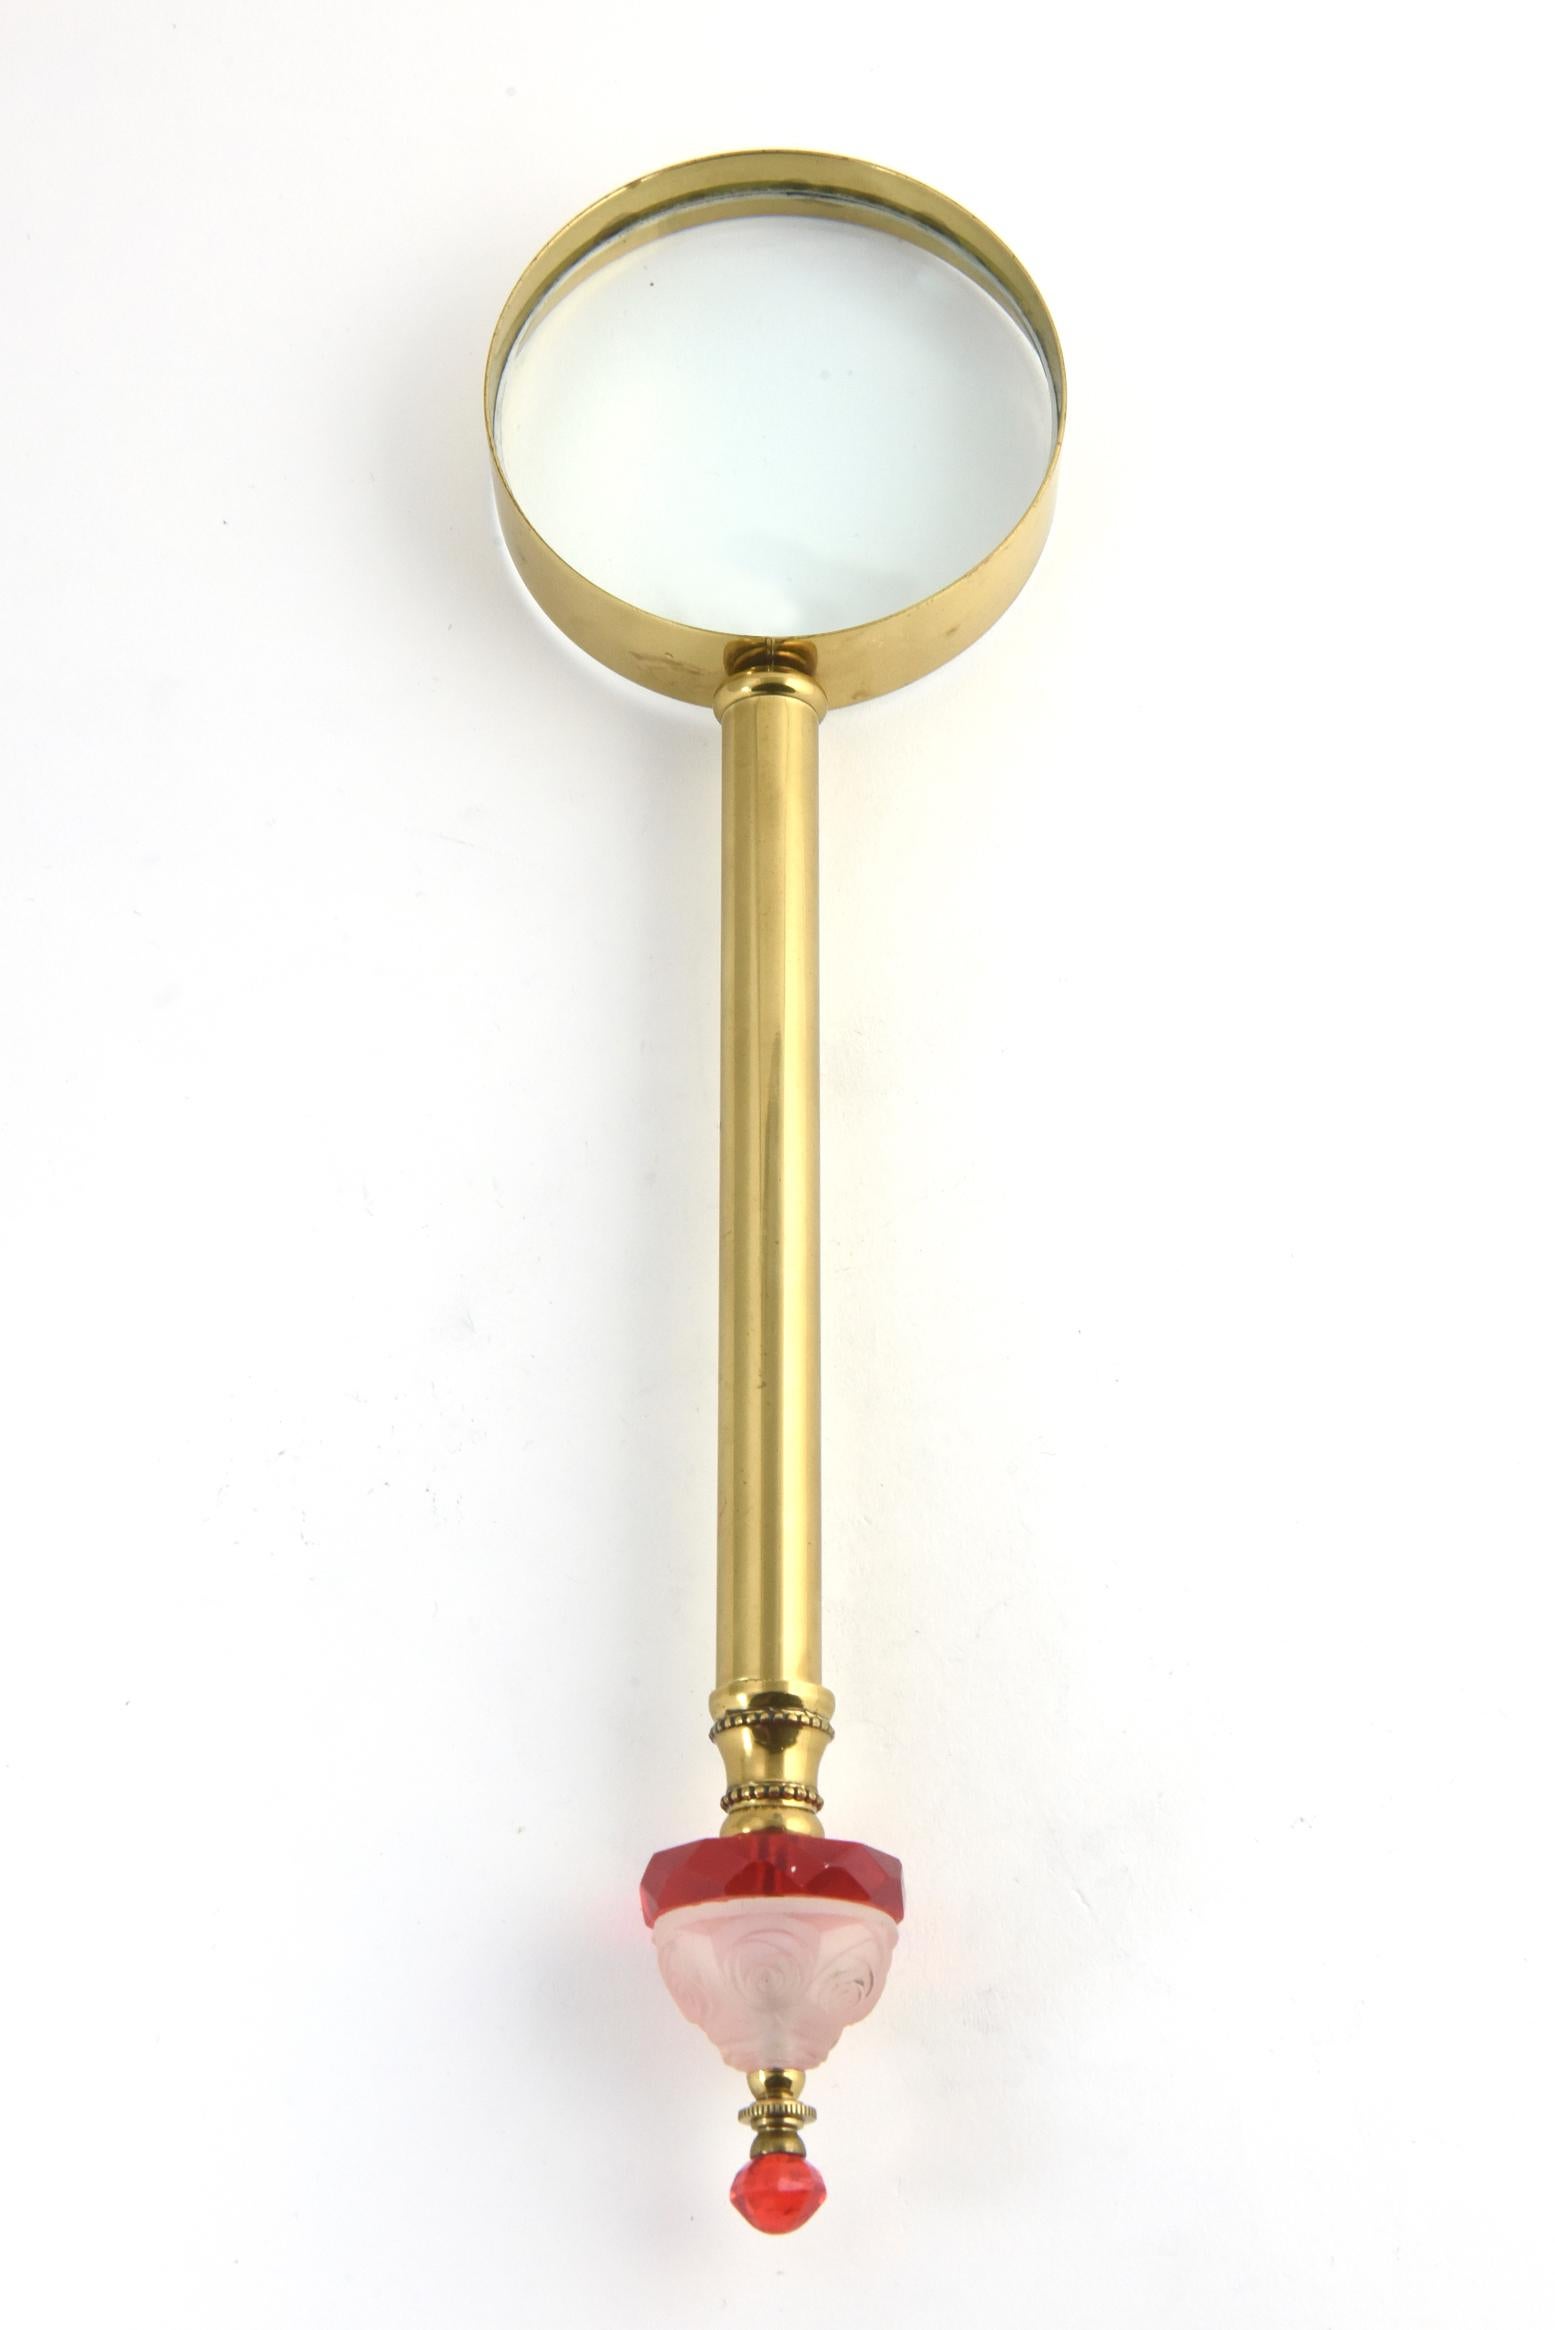 Brass magnifier with red-and-white crystal accent piece on the handle. The center section is frosted crystal with raised floral design. On either side of the floral piece, there is a faceted red accent section. The magnifier portion is a later day